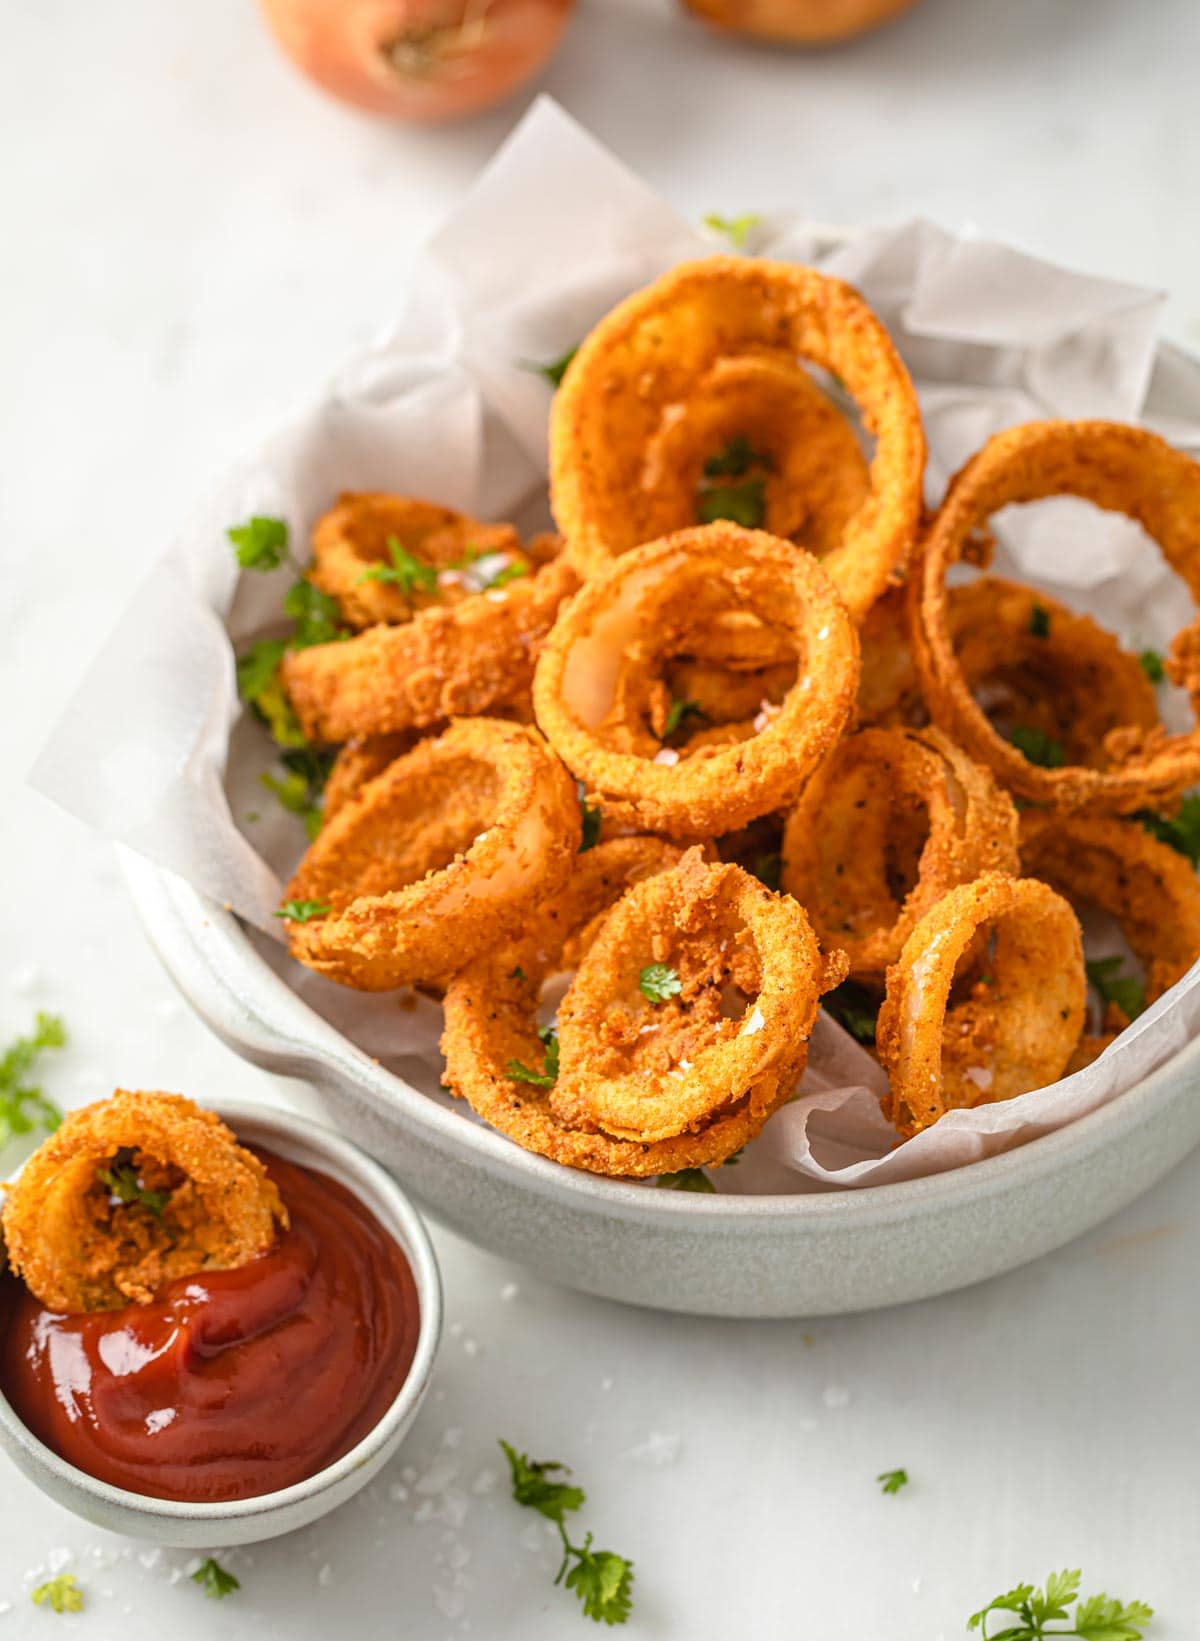 low carb onion rings in a bowl with a portion of ketchup on the side